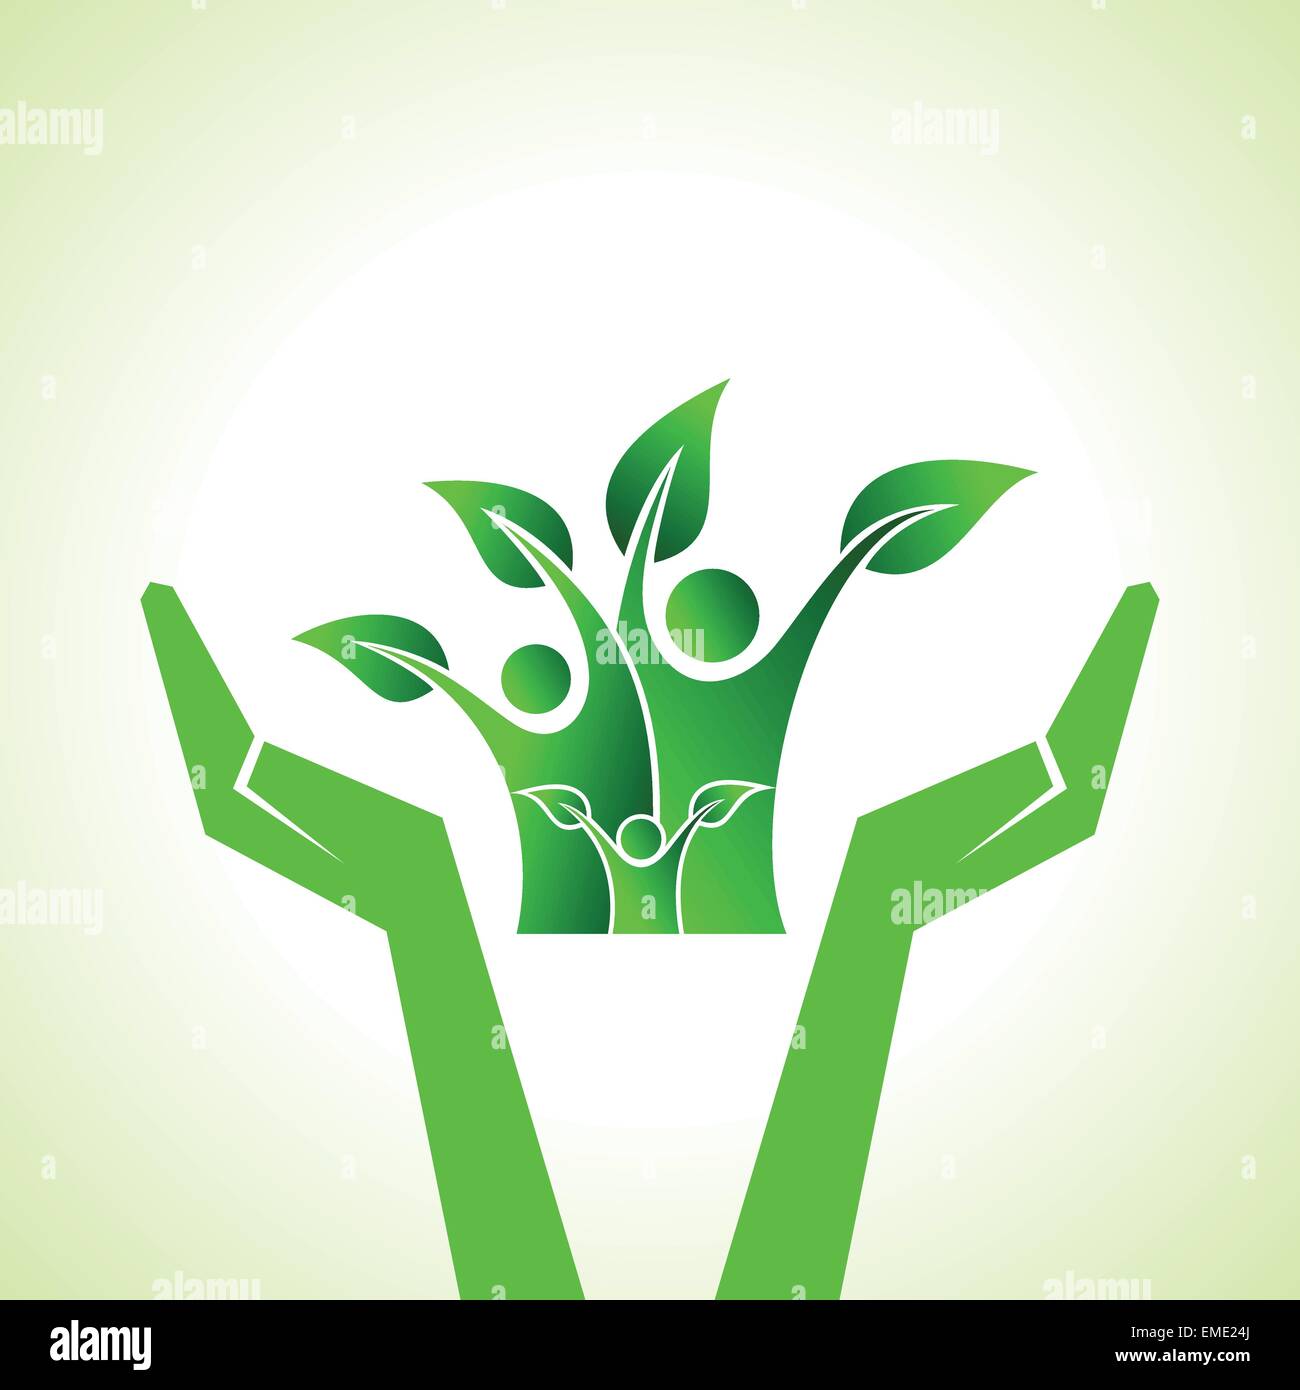 Illustration of save eco family concept Stock Vector